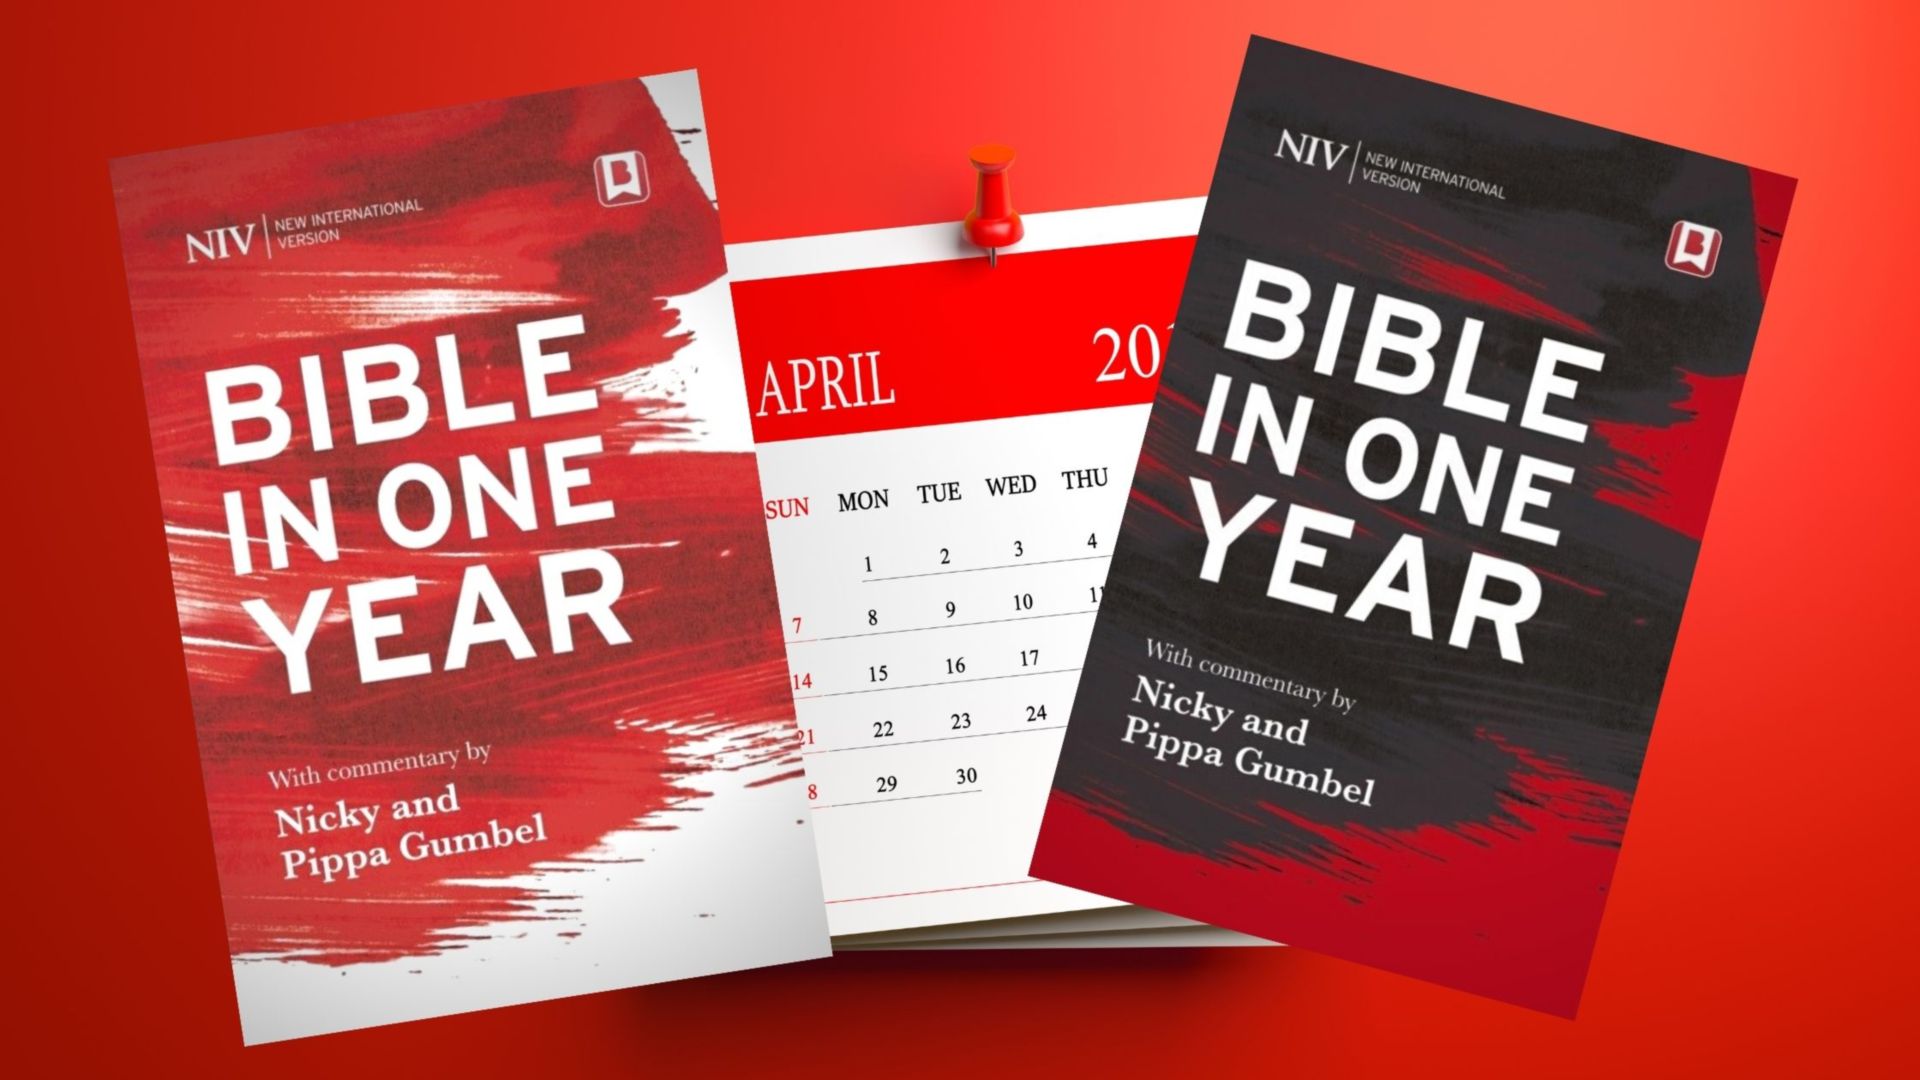 NIV Bible In One Year with Commentary by Nicky and Pippa Gumbel 